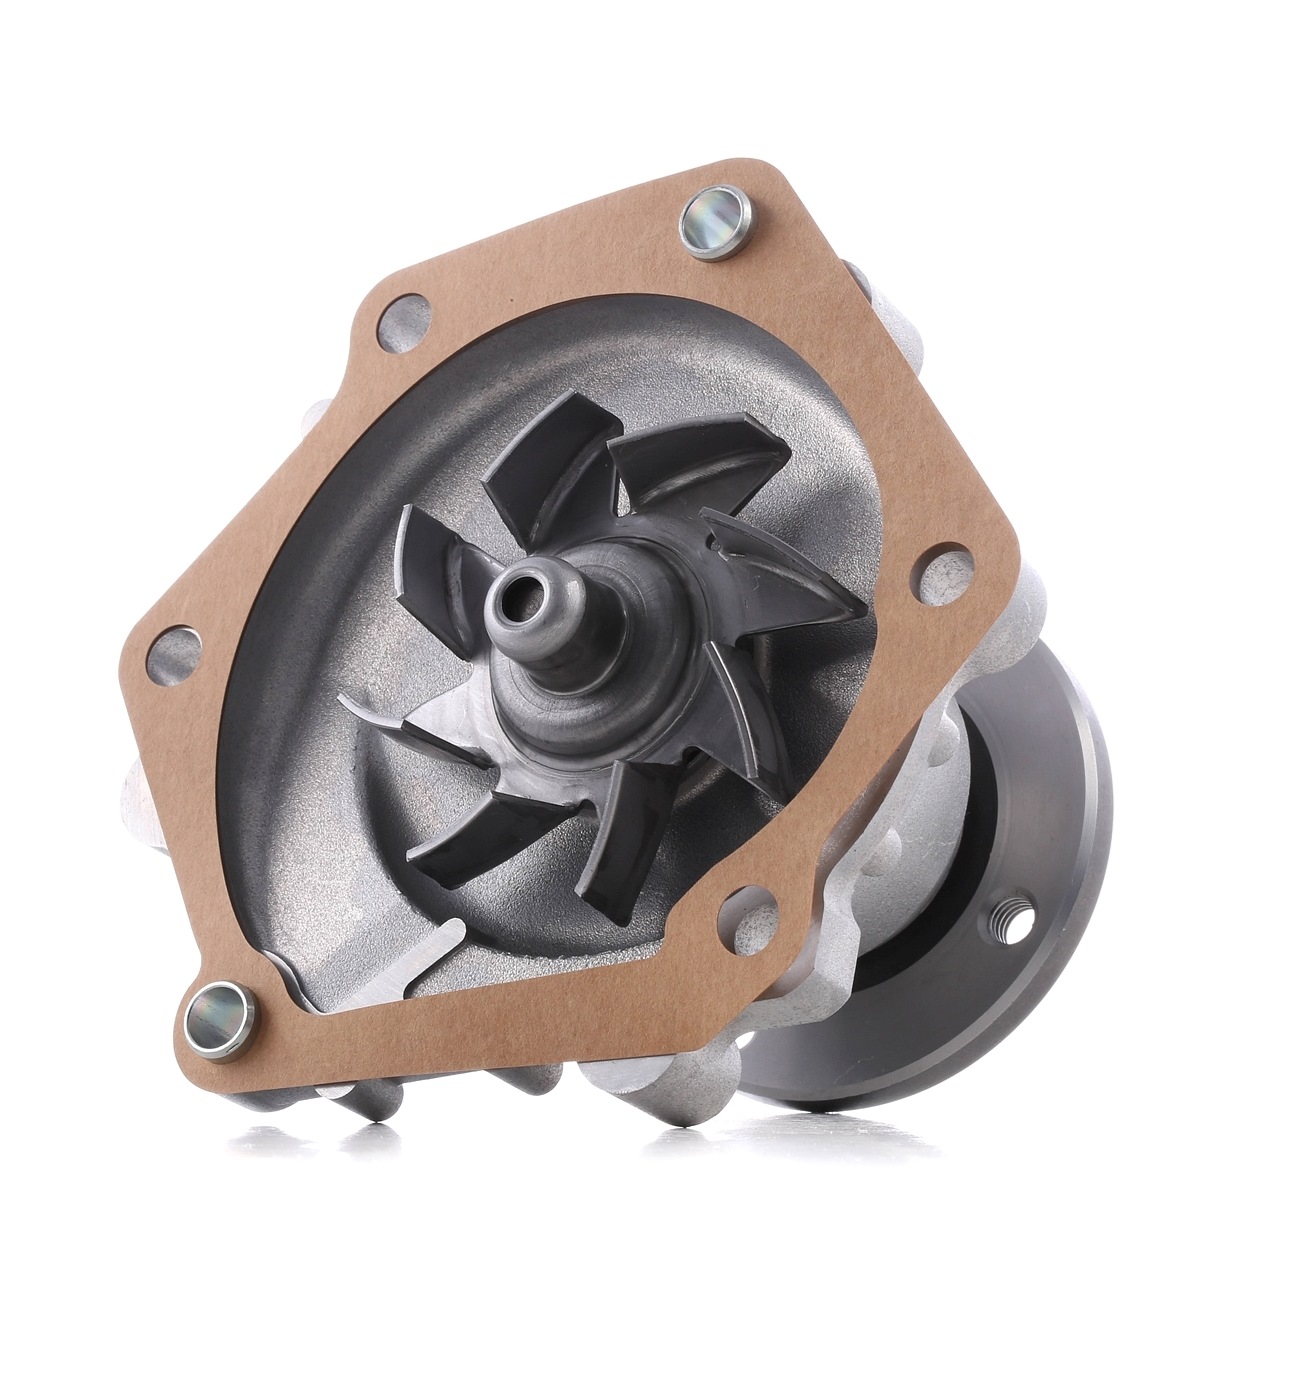 Image of AISIN Water pump VW,TOYOTA WPT-001B 1610009092,1610009102,1610059155 Engine water pump,Water pump for engine 1610059255,1610059256,1610059257